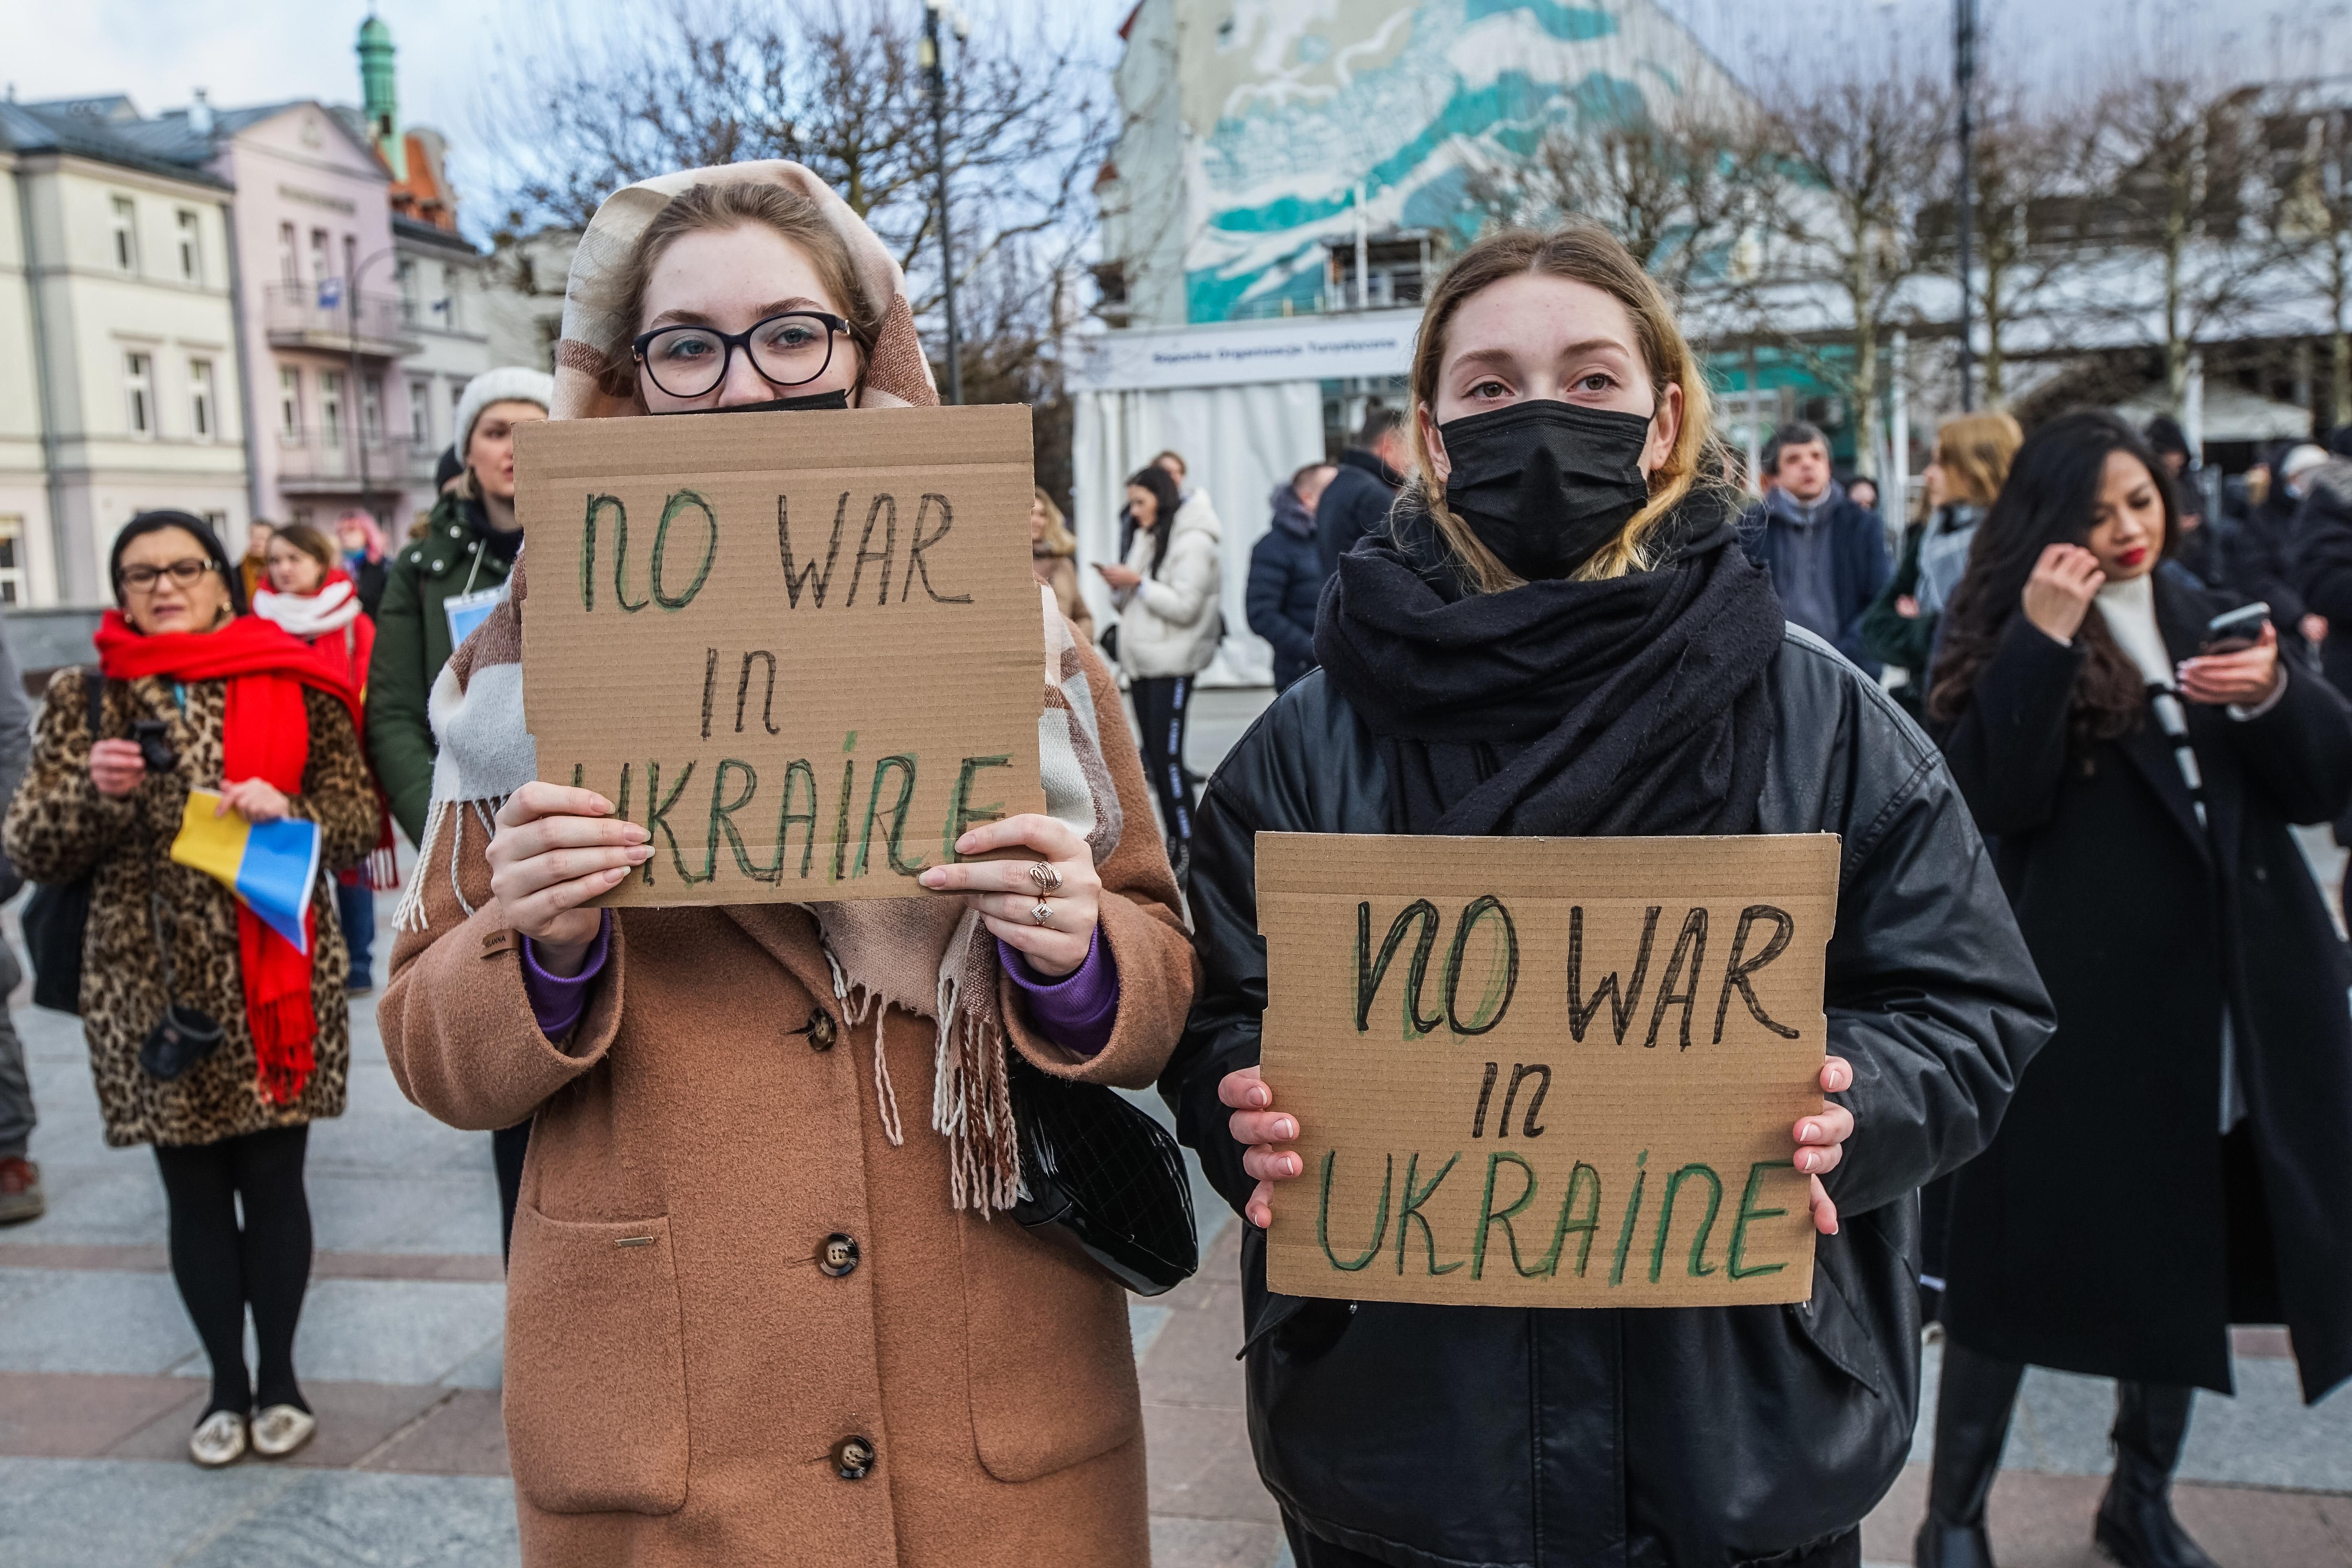 Protesters hold anti-war signs and Ukrainian flags in Sopot, Poland on February 26, 2022.